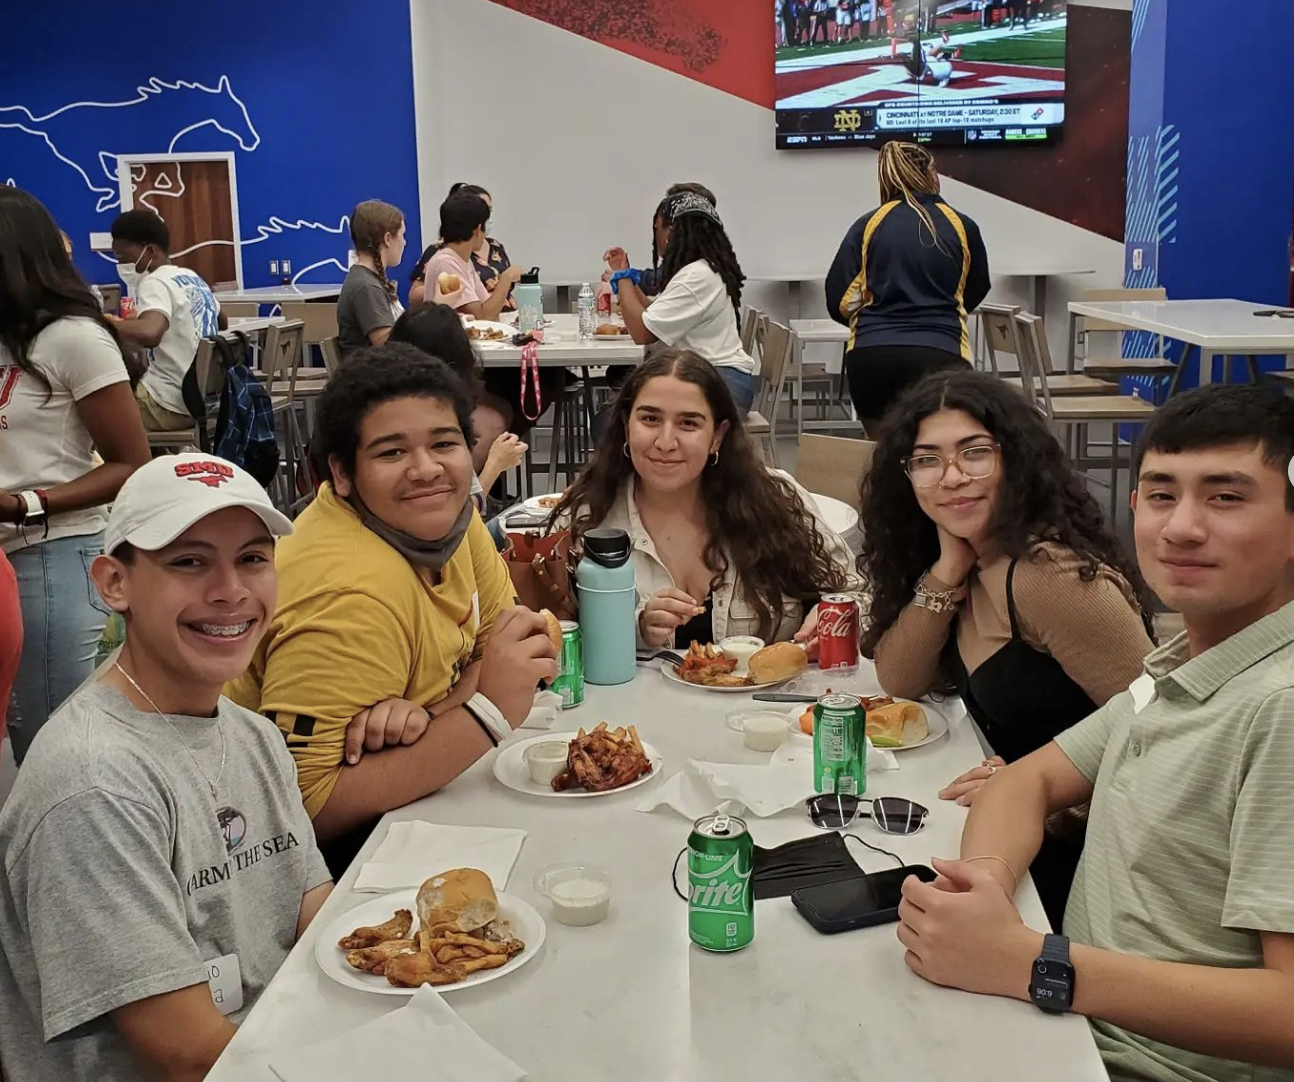 Group of students posing at a table